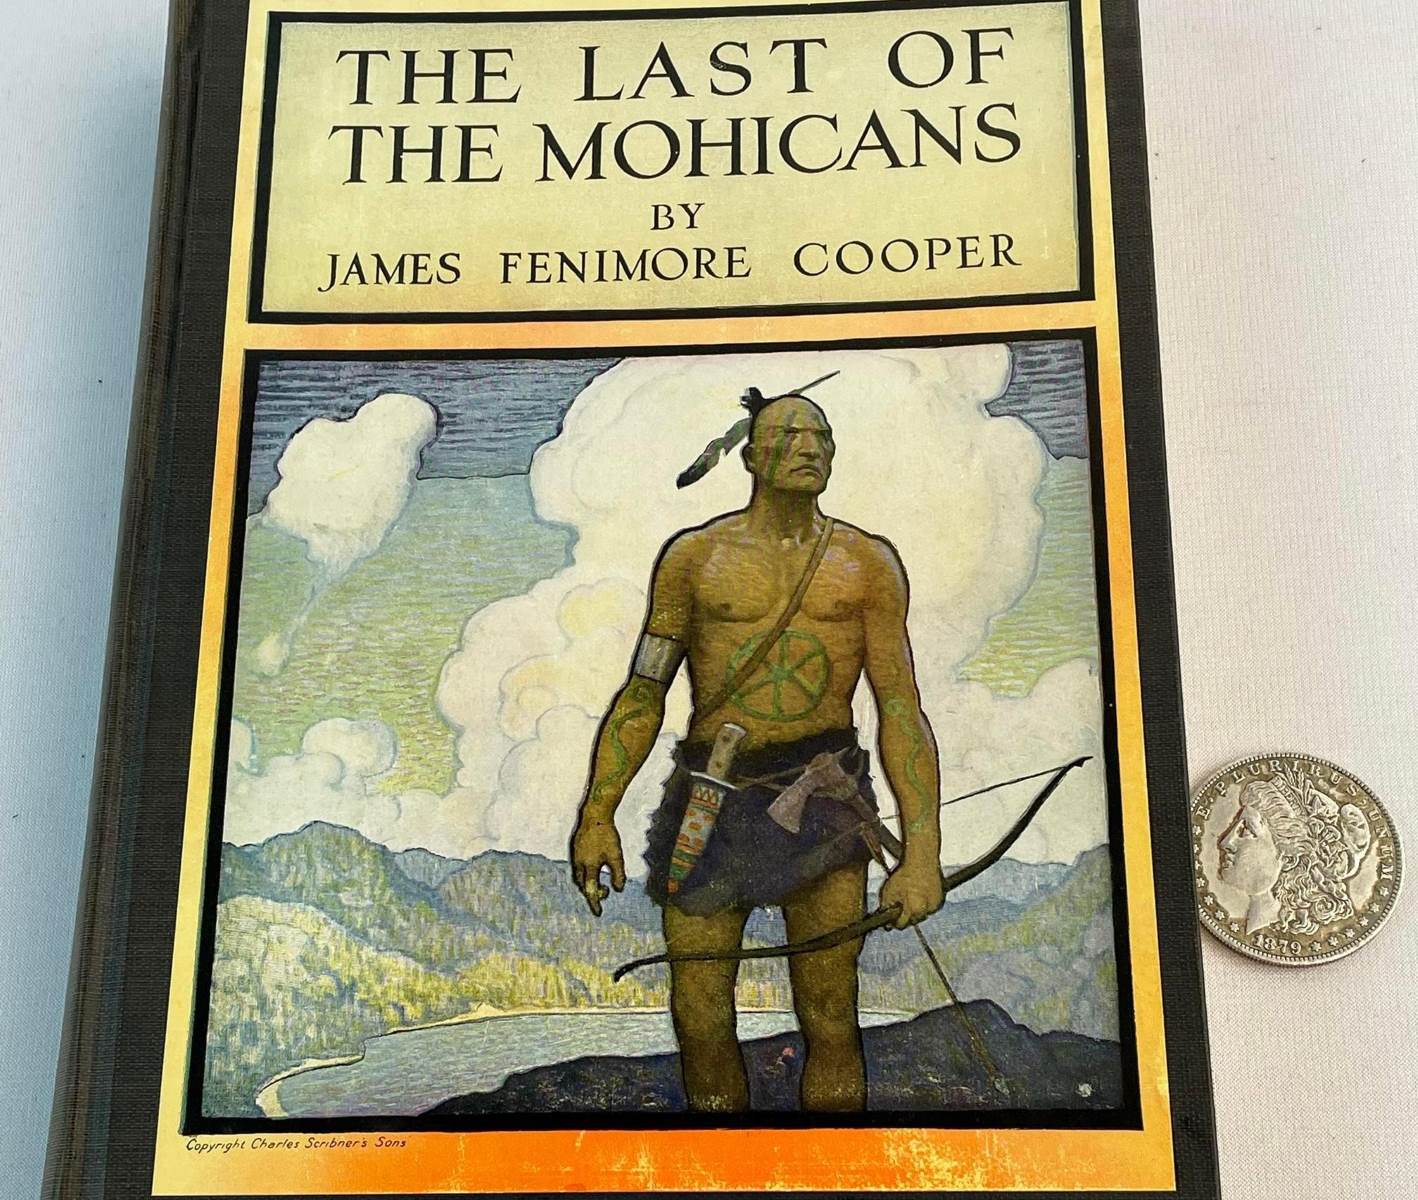 20-captivating-facts-about-the-last-of-the-mohicans-james-fenimore-cooper